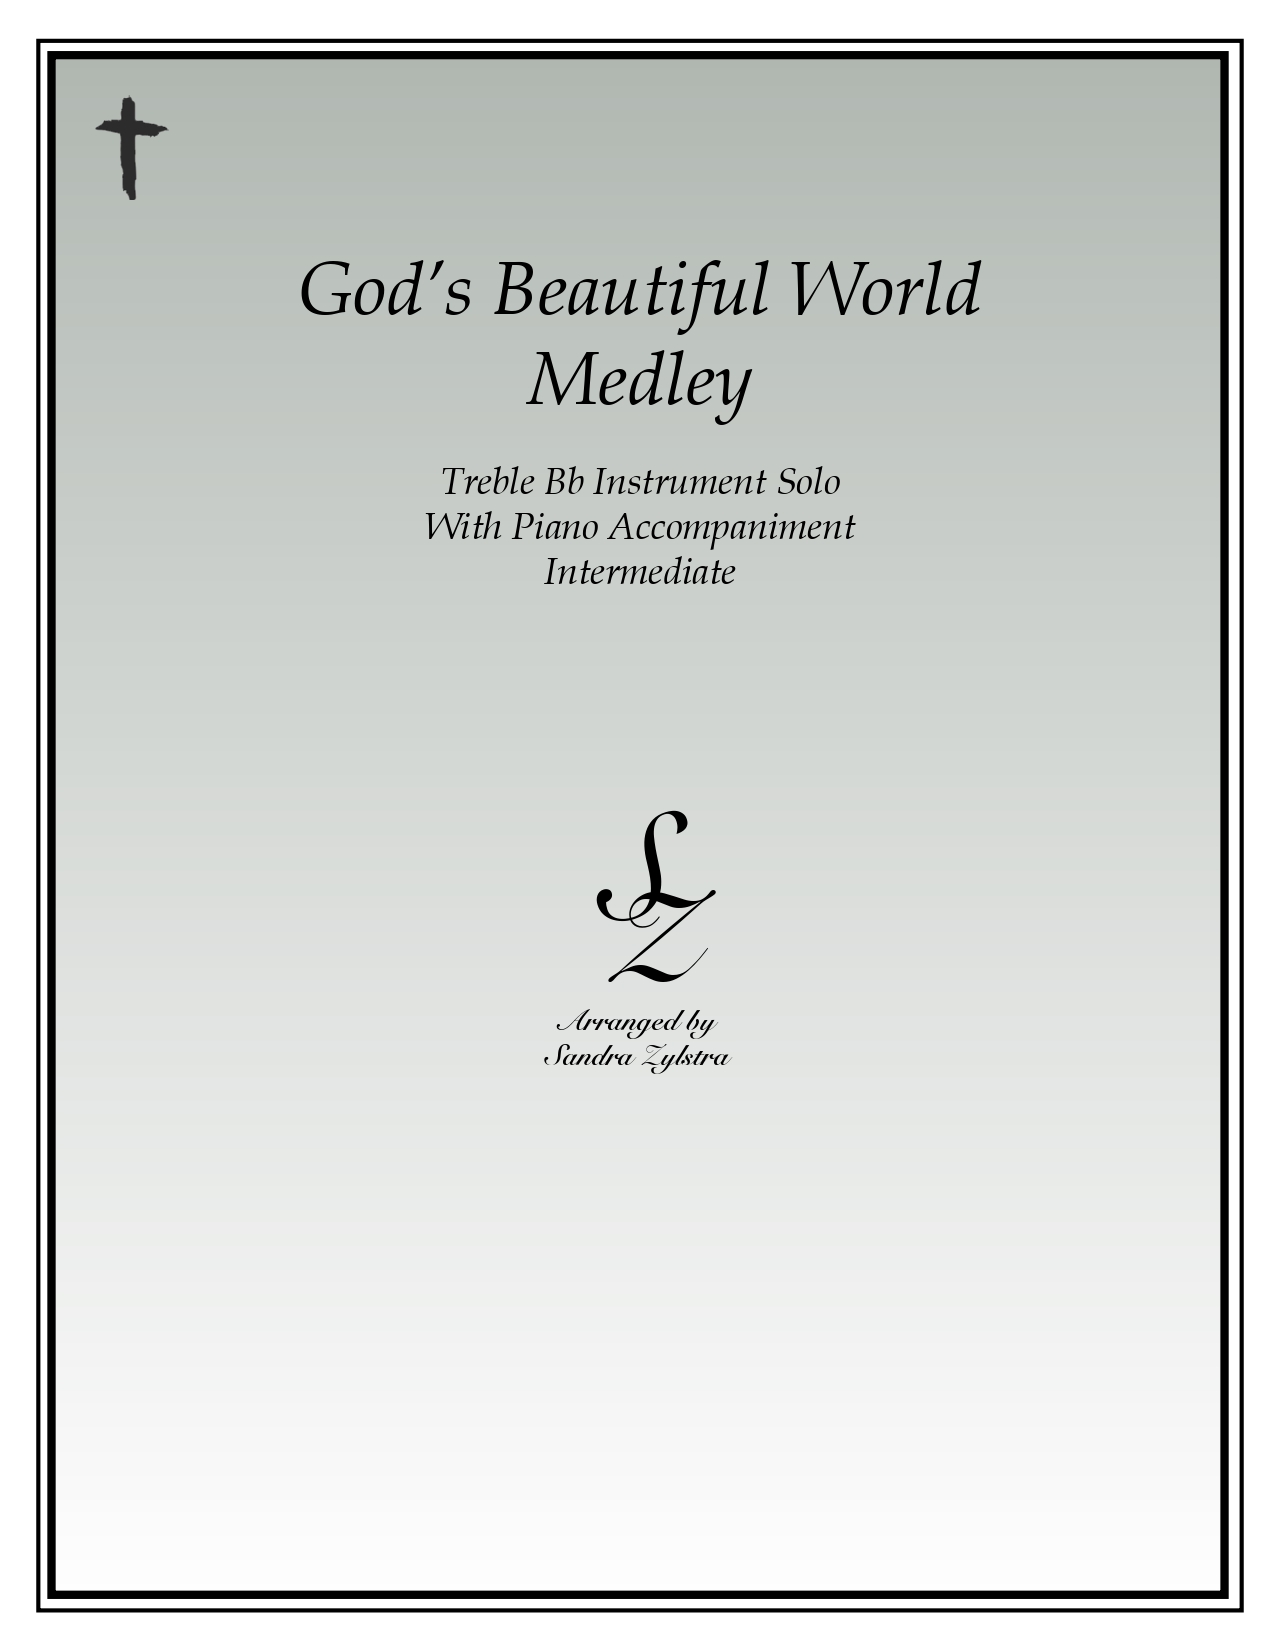 Gods Beautiful World Medley Bb instrument solo part cover page 00011